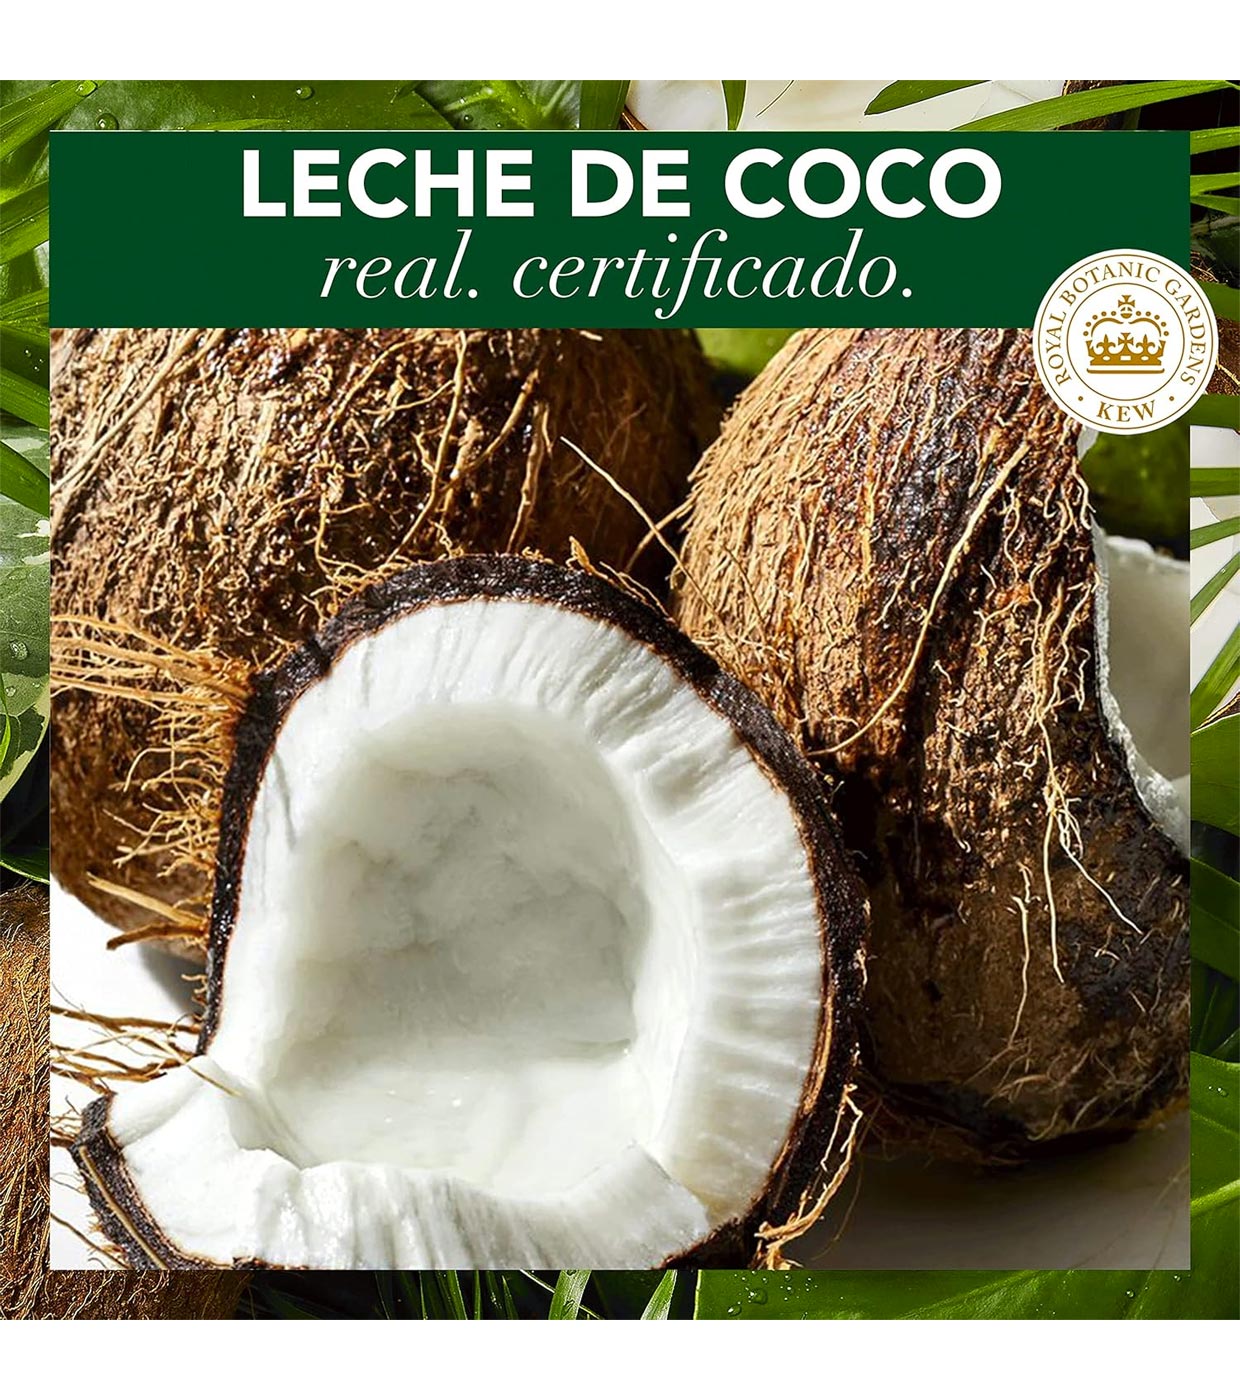 Buy Herbal Essences - Shampoo + mask pack with coconut milk